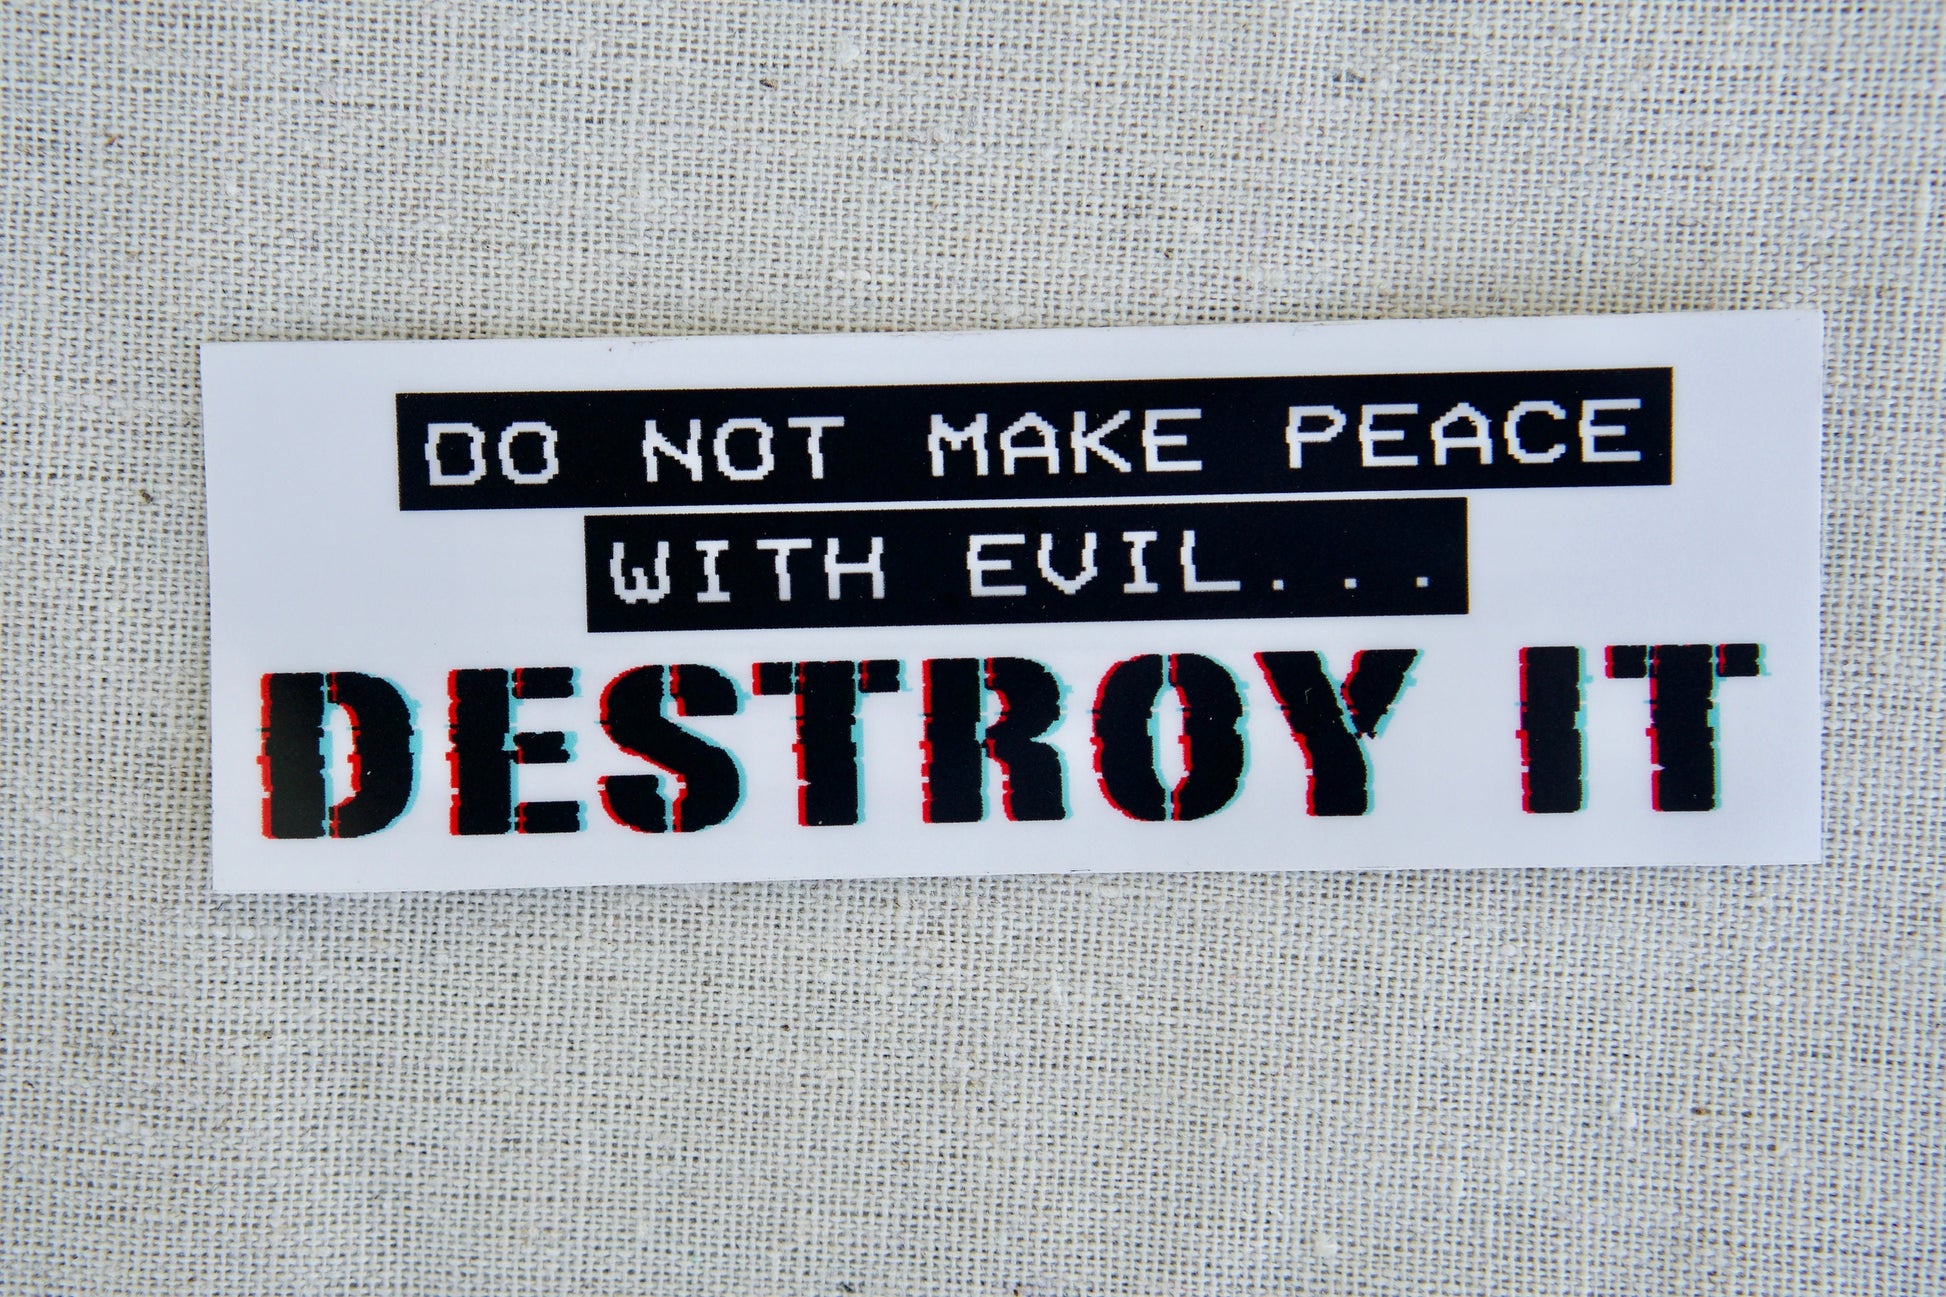 Do Not Make Peace With Evil, Destroy It - Waterproof Vinyl Sticker. 4.5" x 1.5". Perfect for spreading faith and reminding others to stand against evil. Durable, dishwasher-safe, and leaves no residue upon removal.